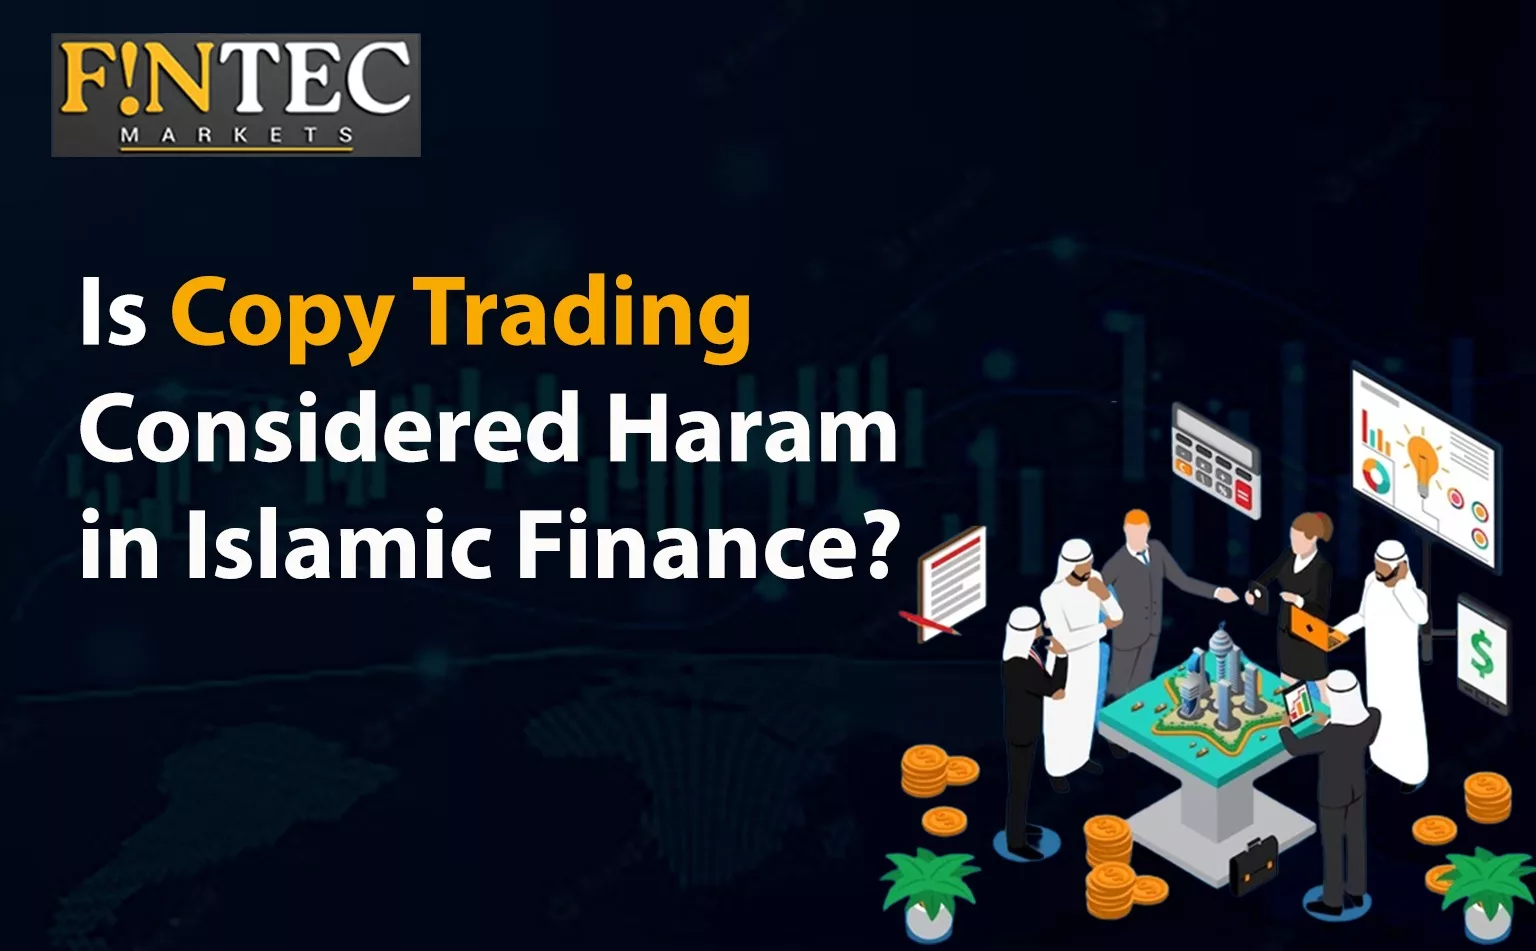 Is Copy Trading Considered Haram in Islamic Finance?